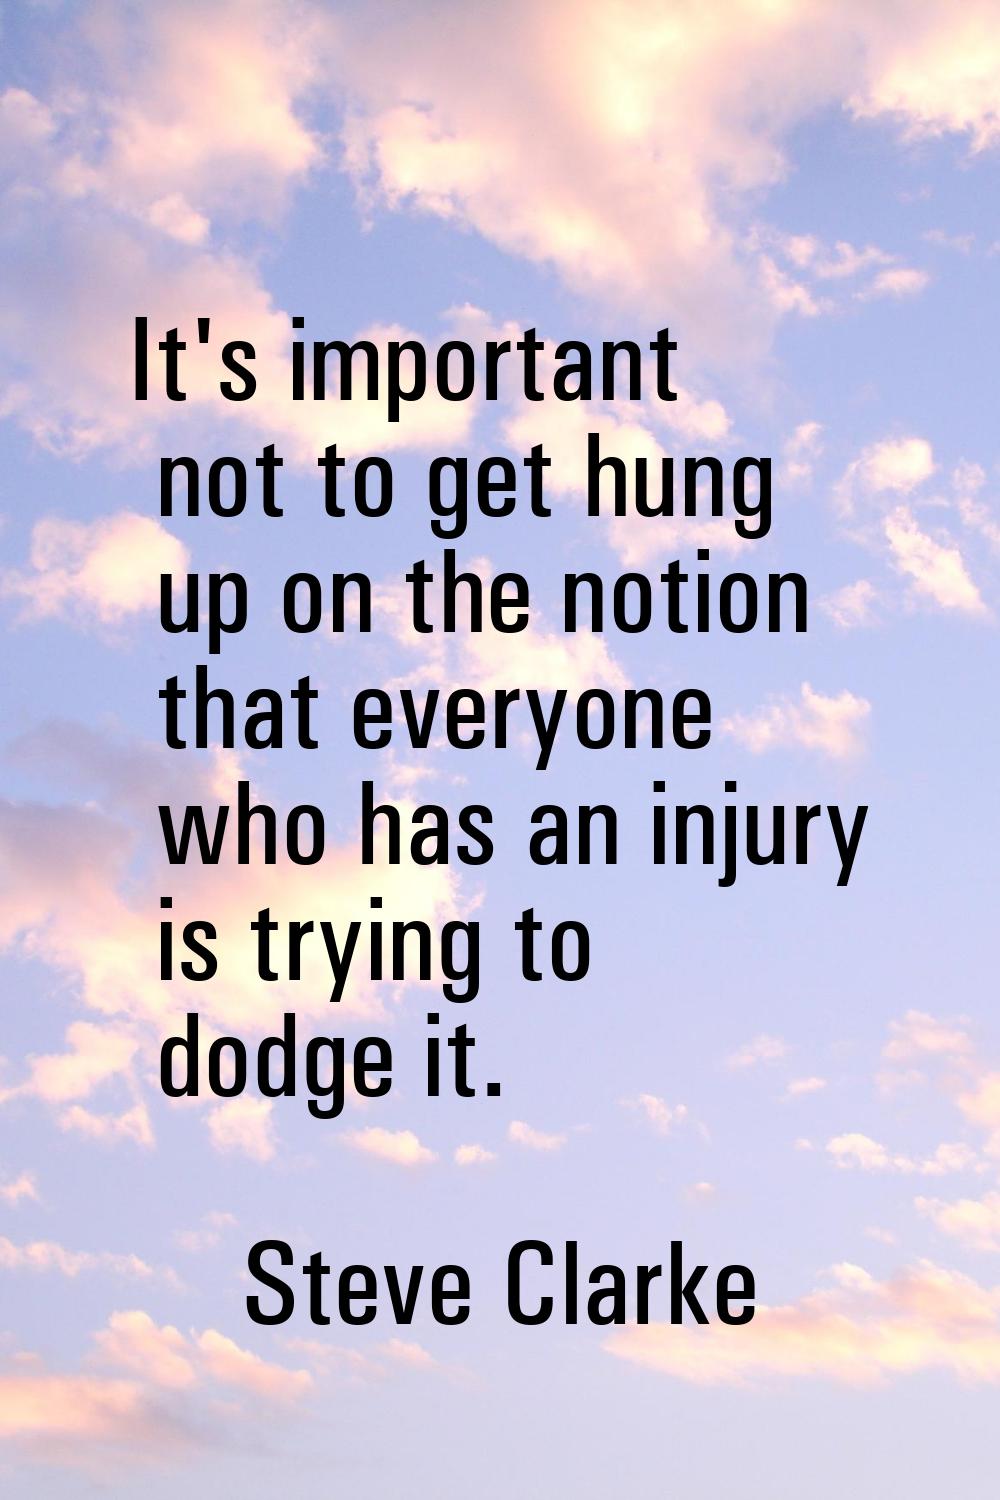 It's important not to get hung up on the notion that everyone who has an injury is trying to dodge 